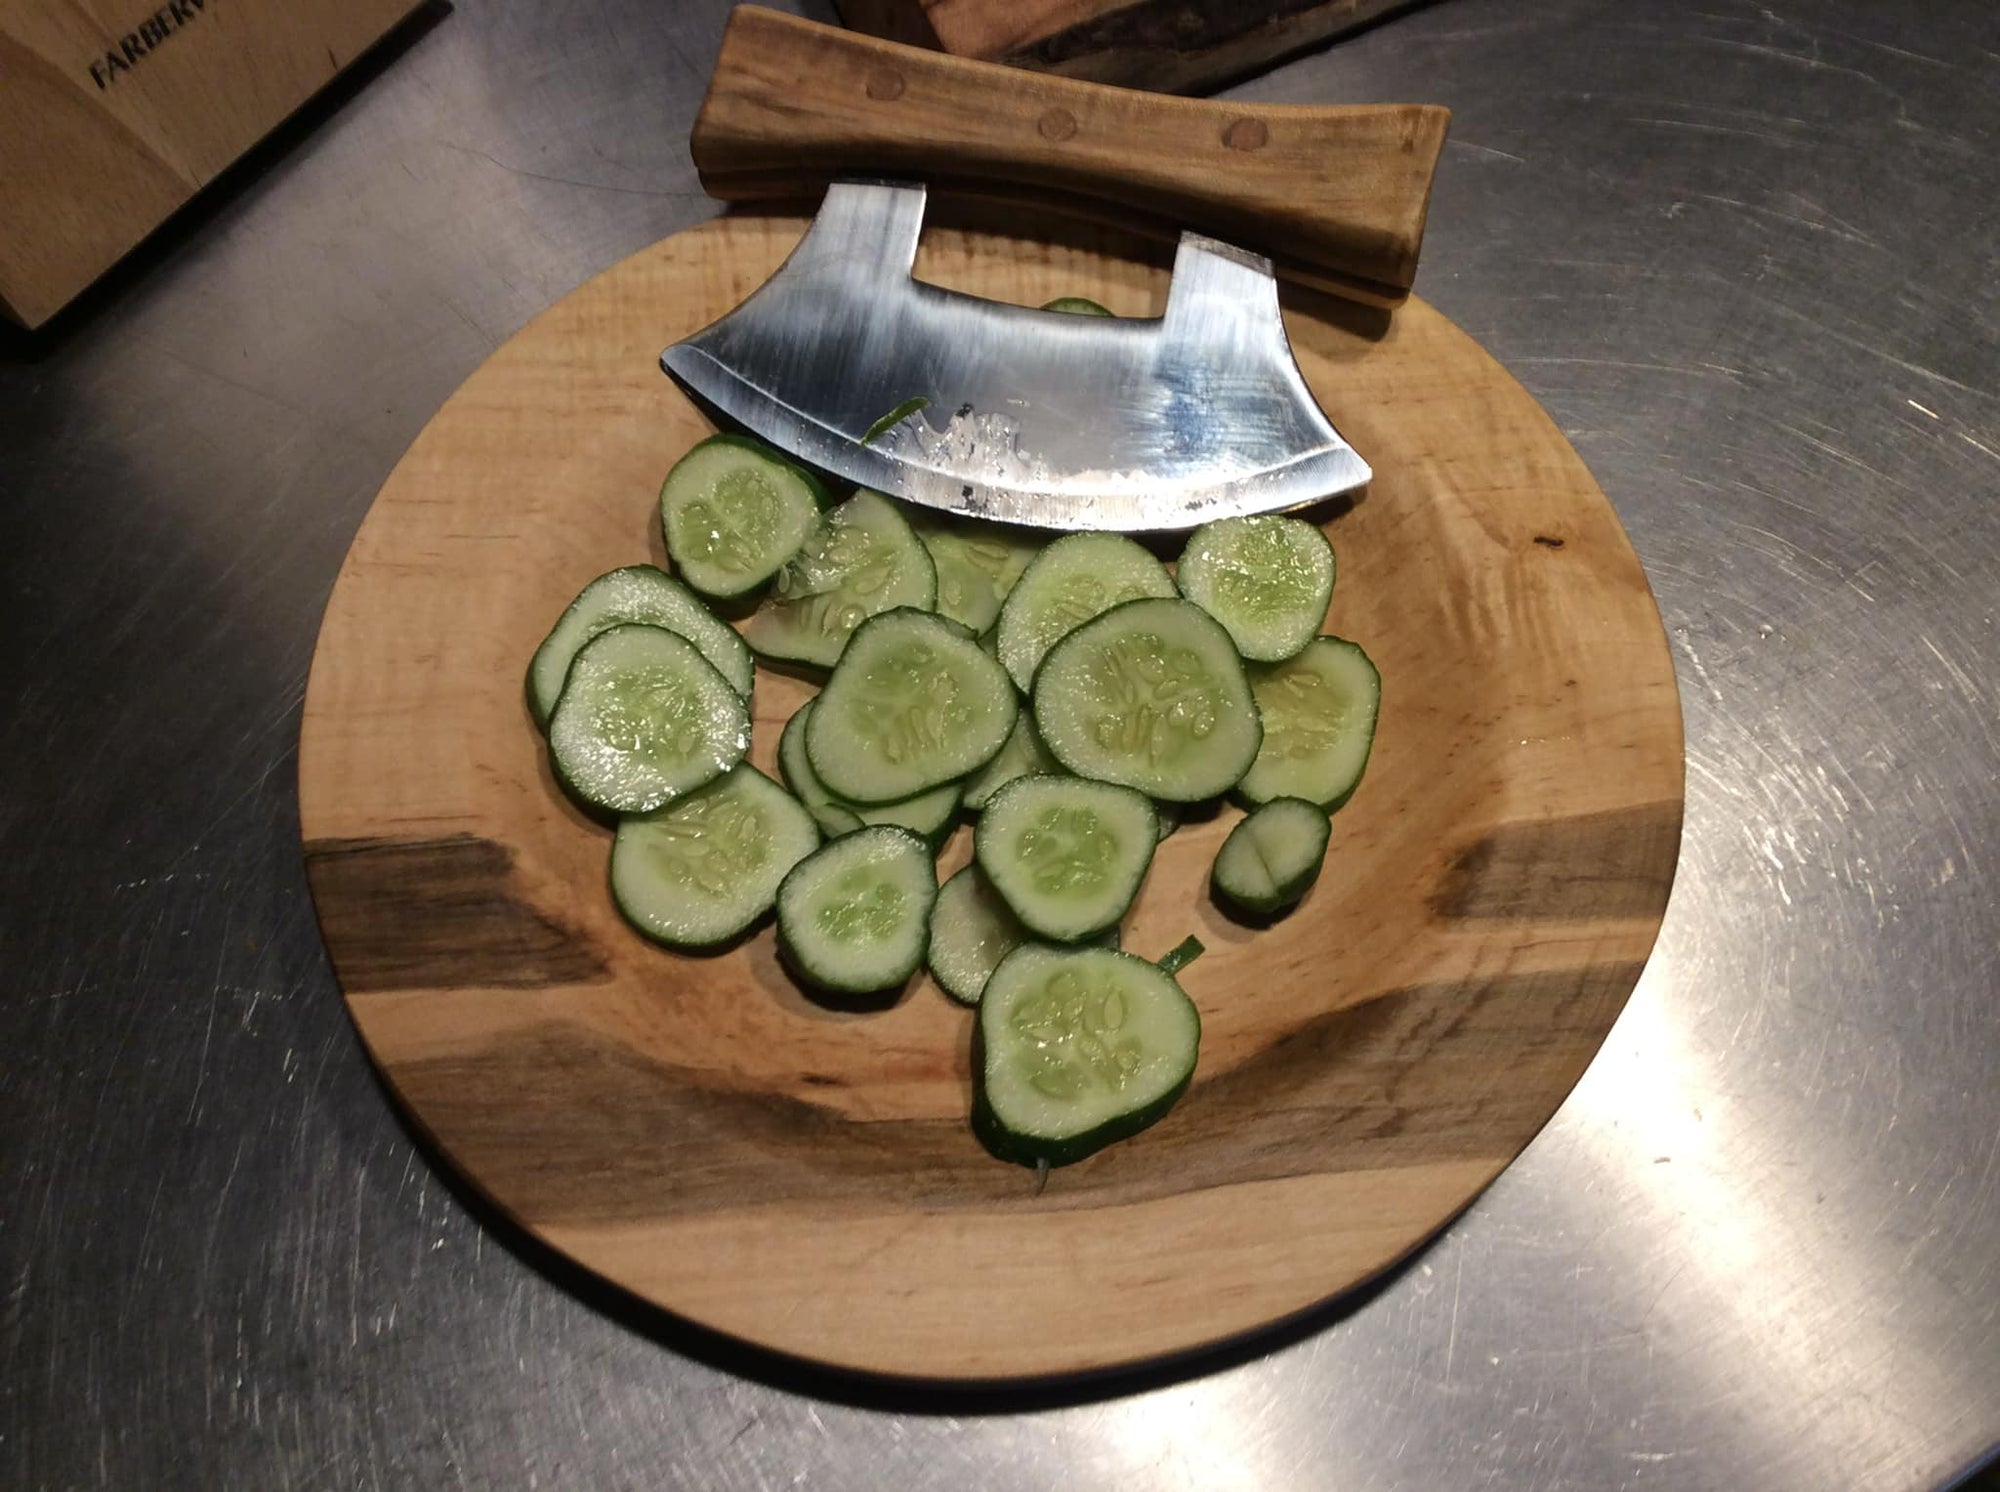 An exquisite Ulu Bowl and Knife with Handmade Handle placed on a wooden plate, accompanied by fresh cucumbers.